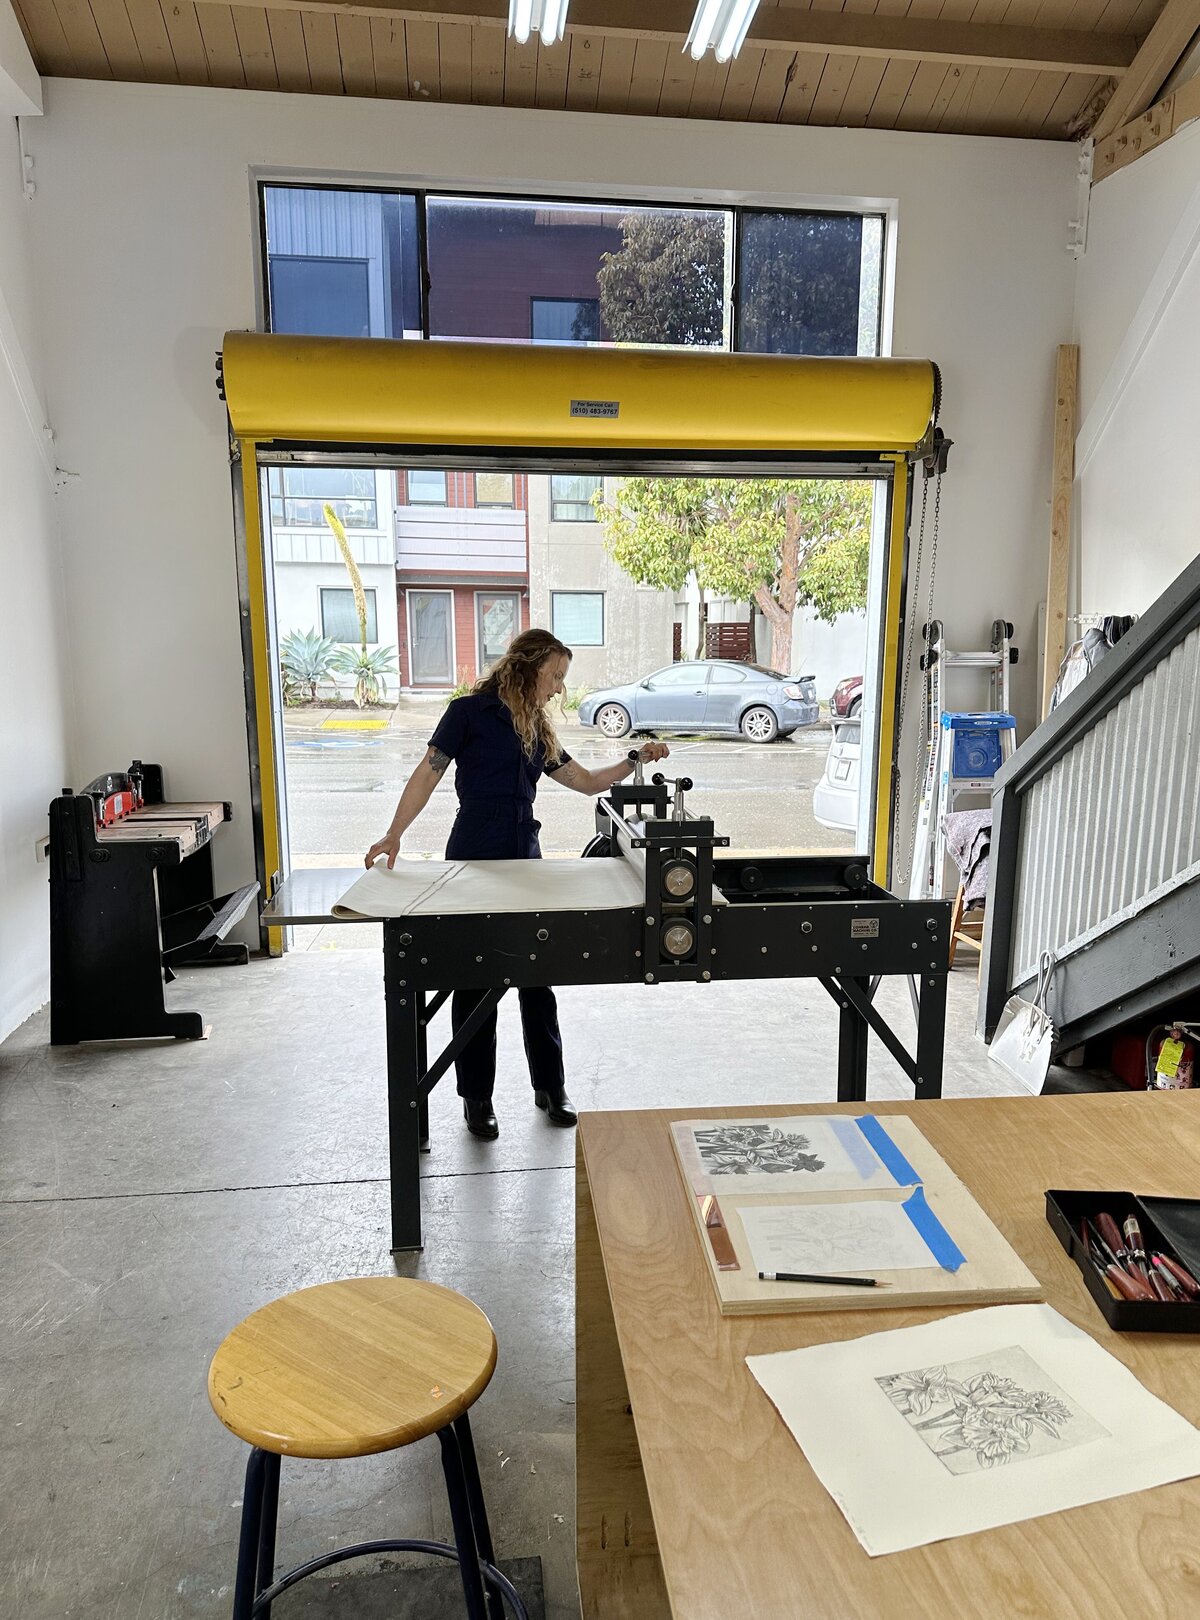 A master printer operating a professional rolling press machine in a brightly-lit printmaking studio with large windows.